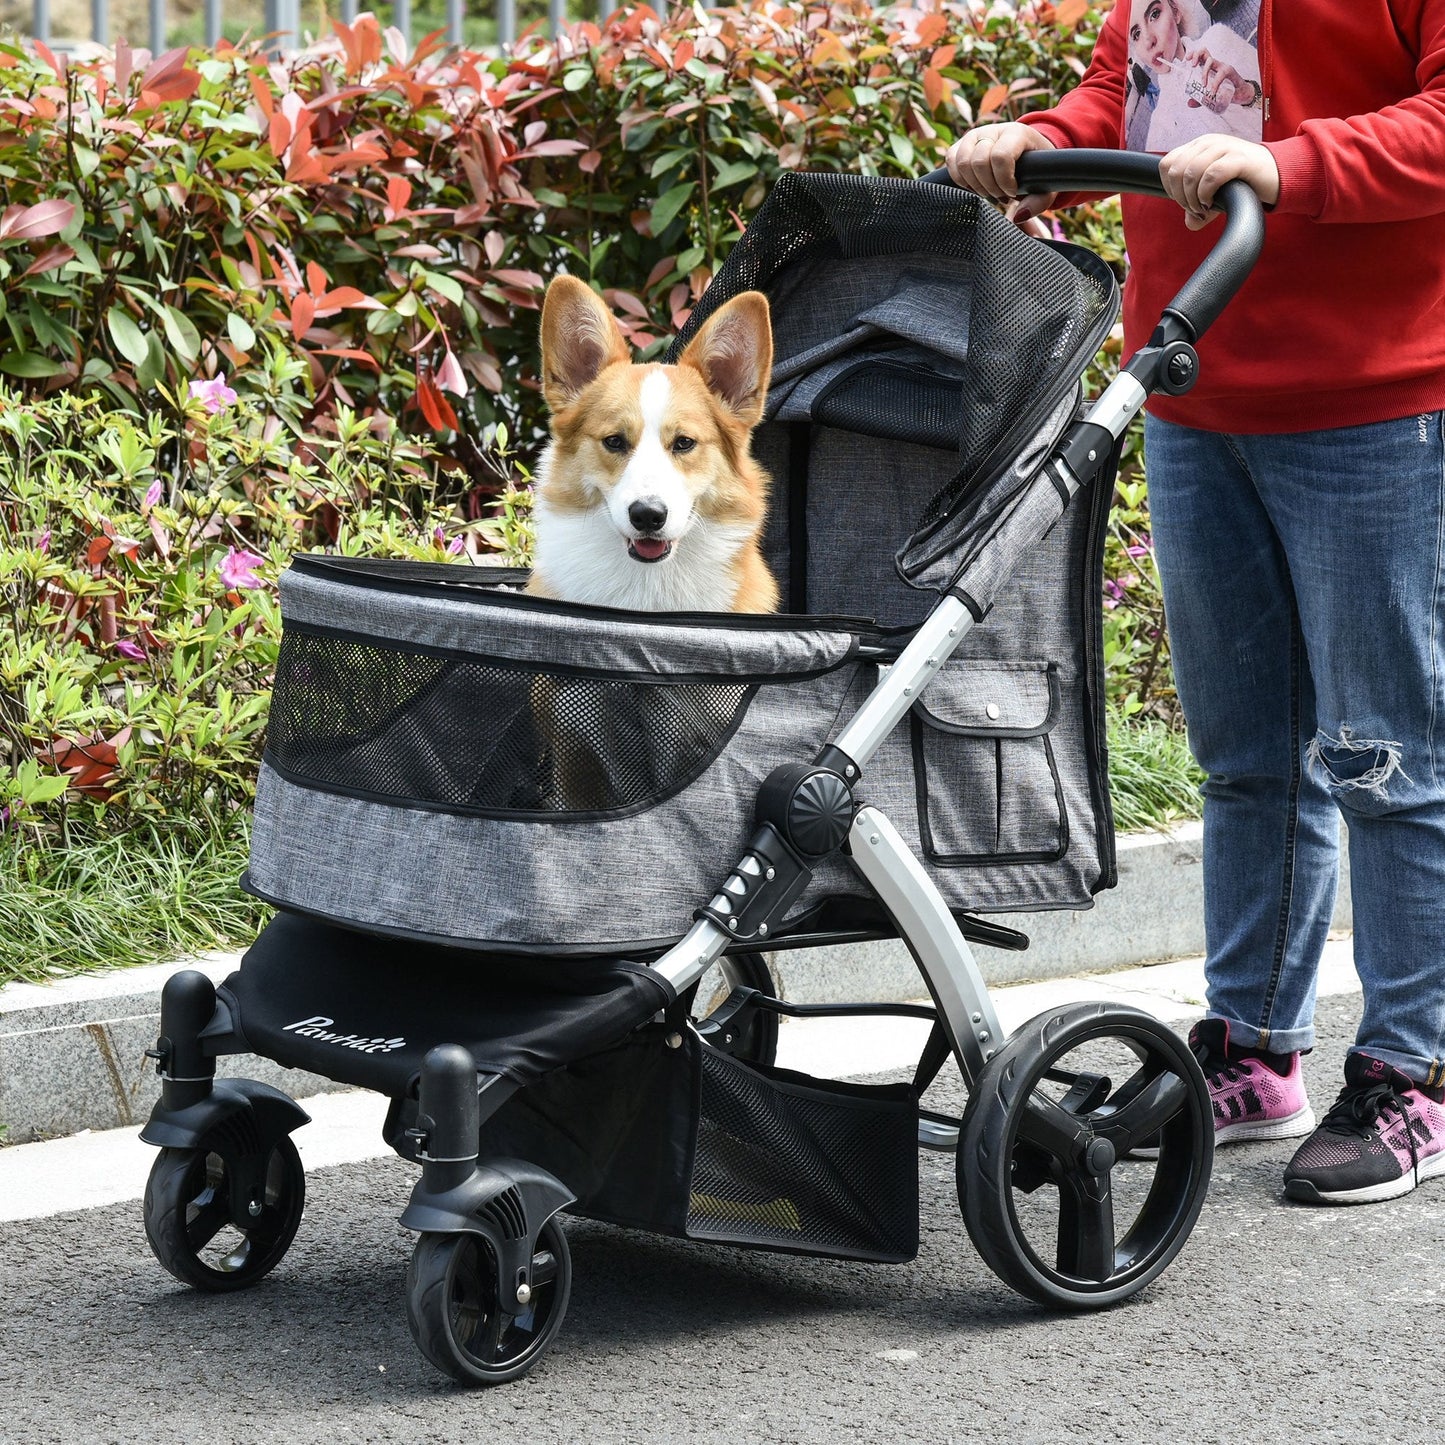 Pet Supplies-Pet Stroller Foldable Dog Cat Travel Carriage with Adjustable Handlebar PVC Wheel Brake Storage Bag Mesh Window Safety Leash Aluminum Grey - Outdoor Style Company